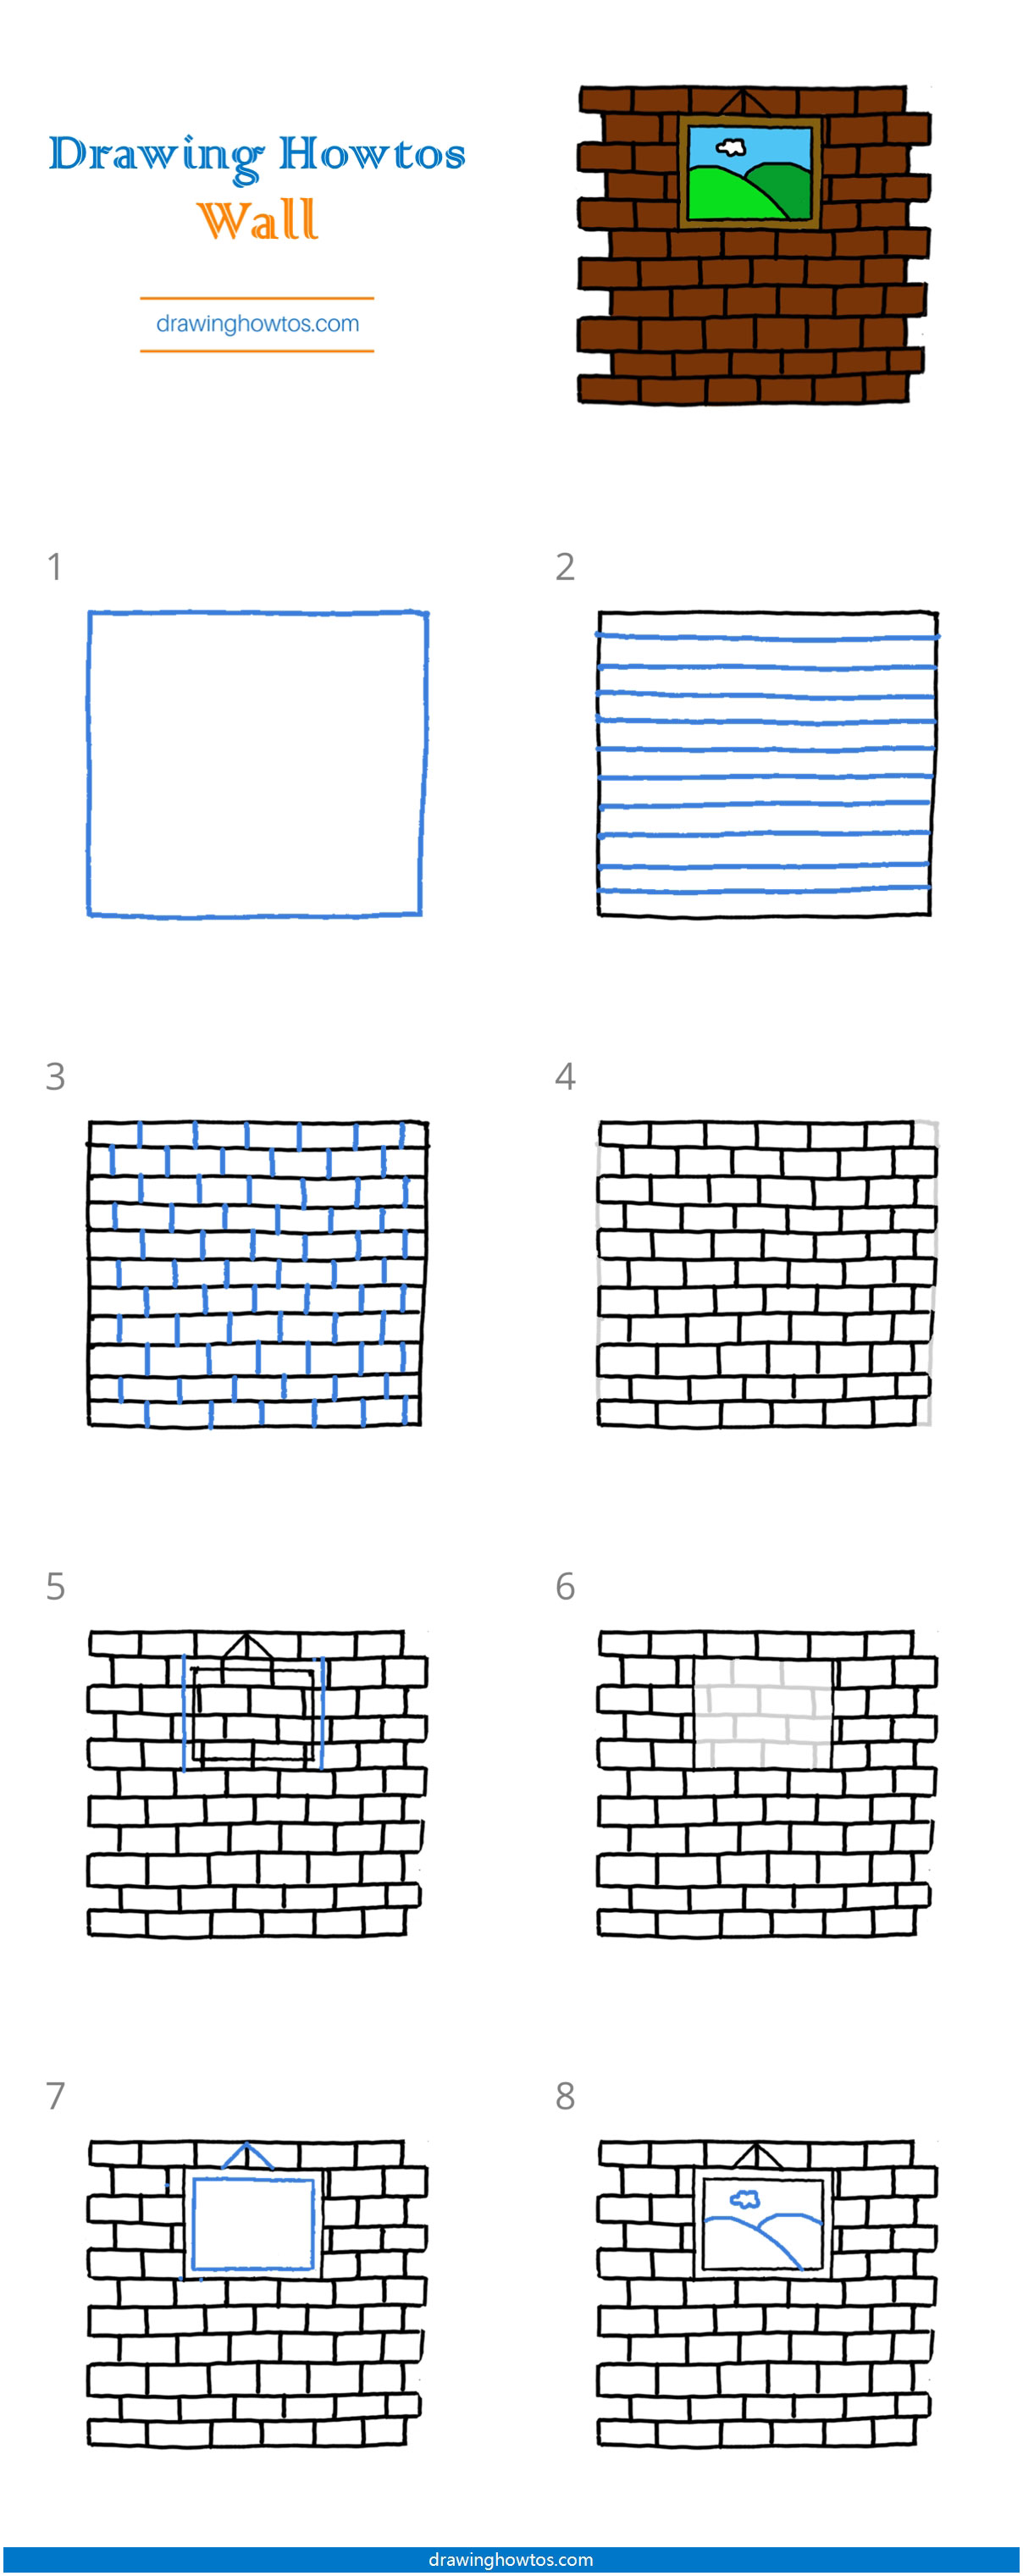 How to Draw a Wall Step by Step